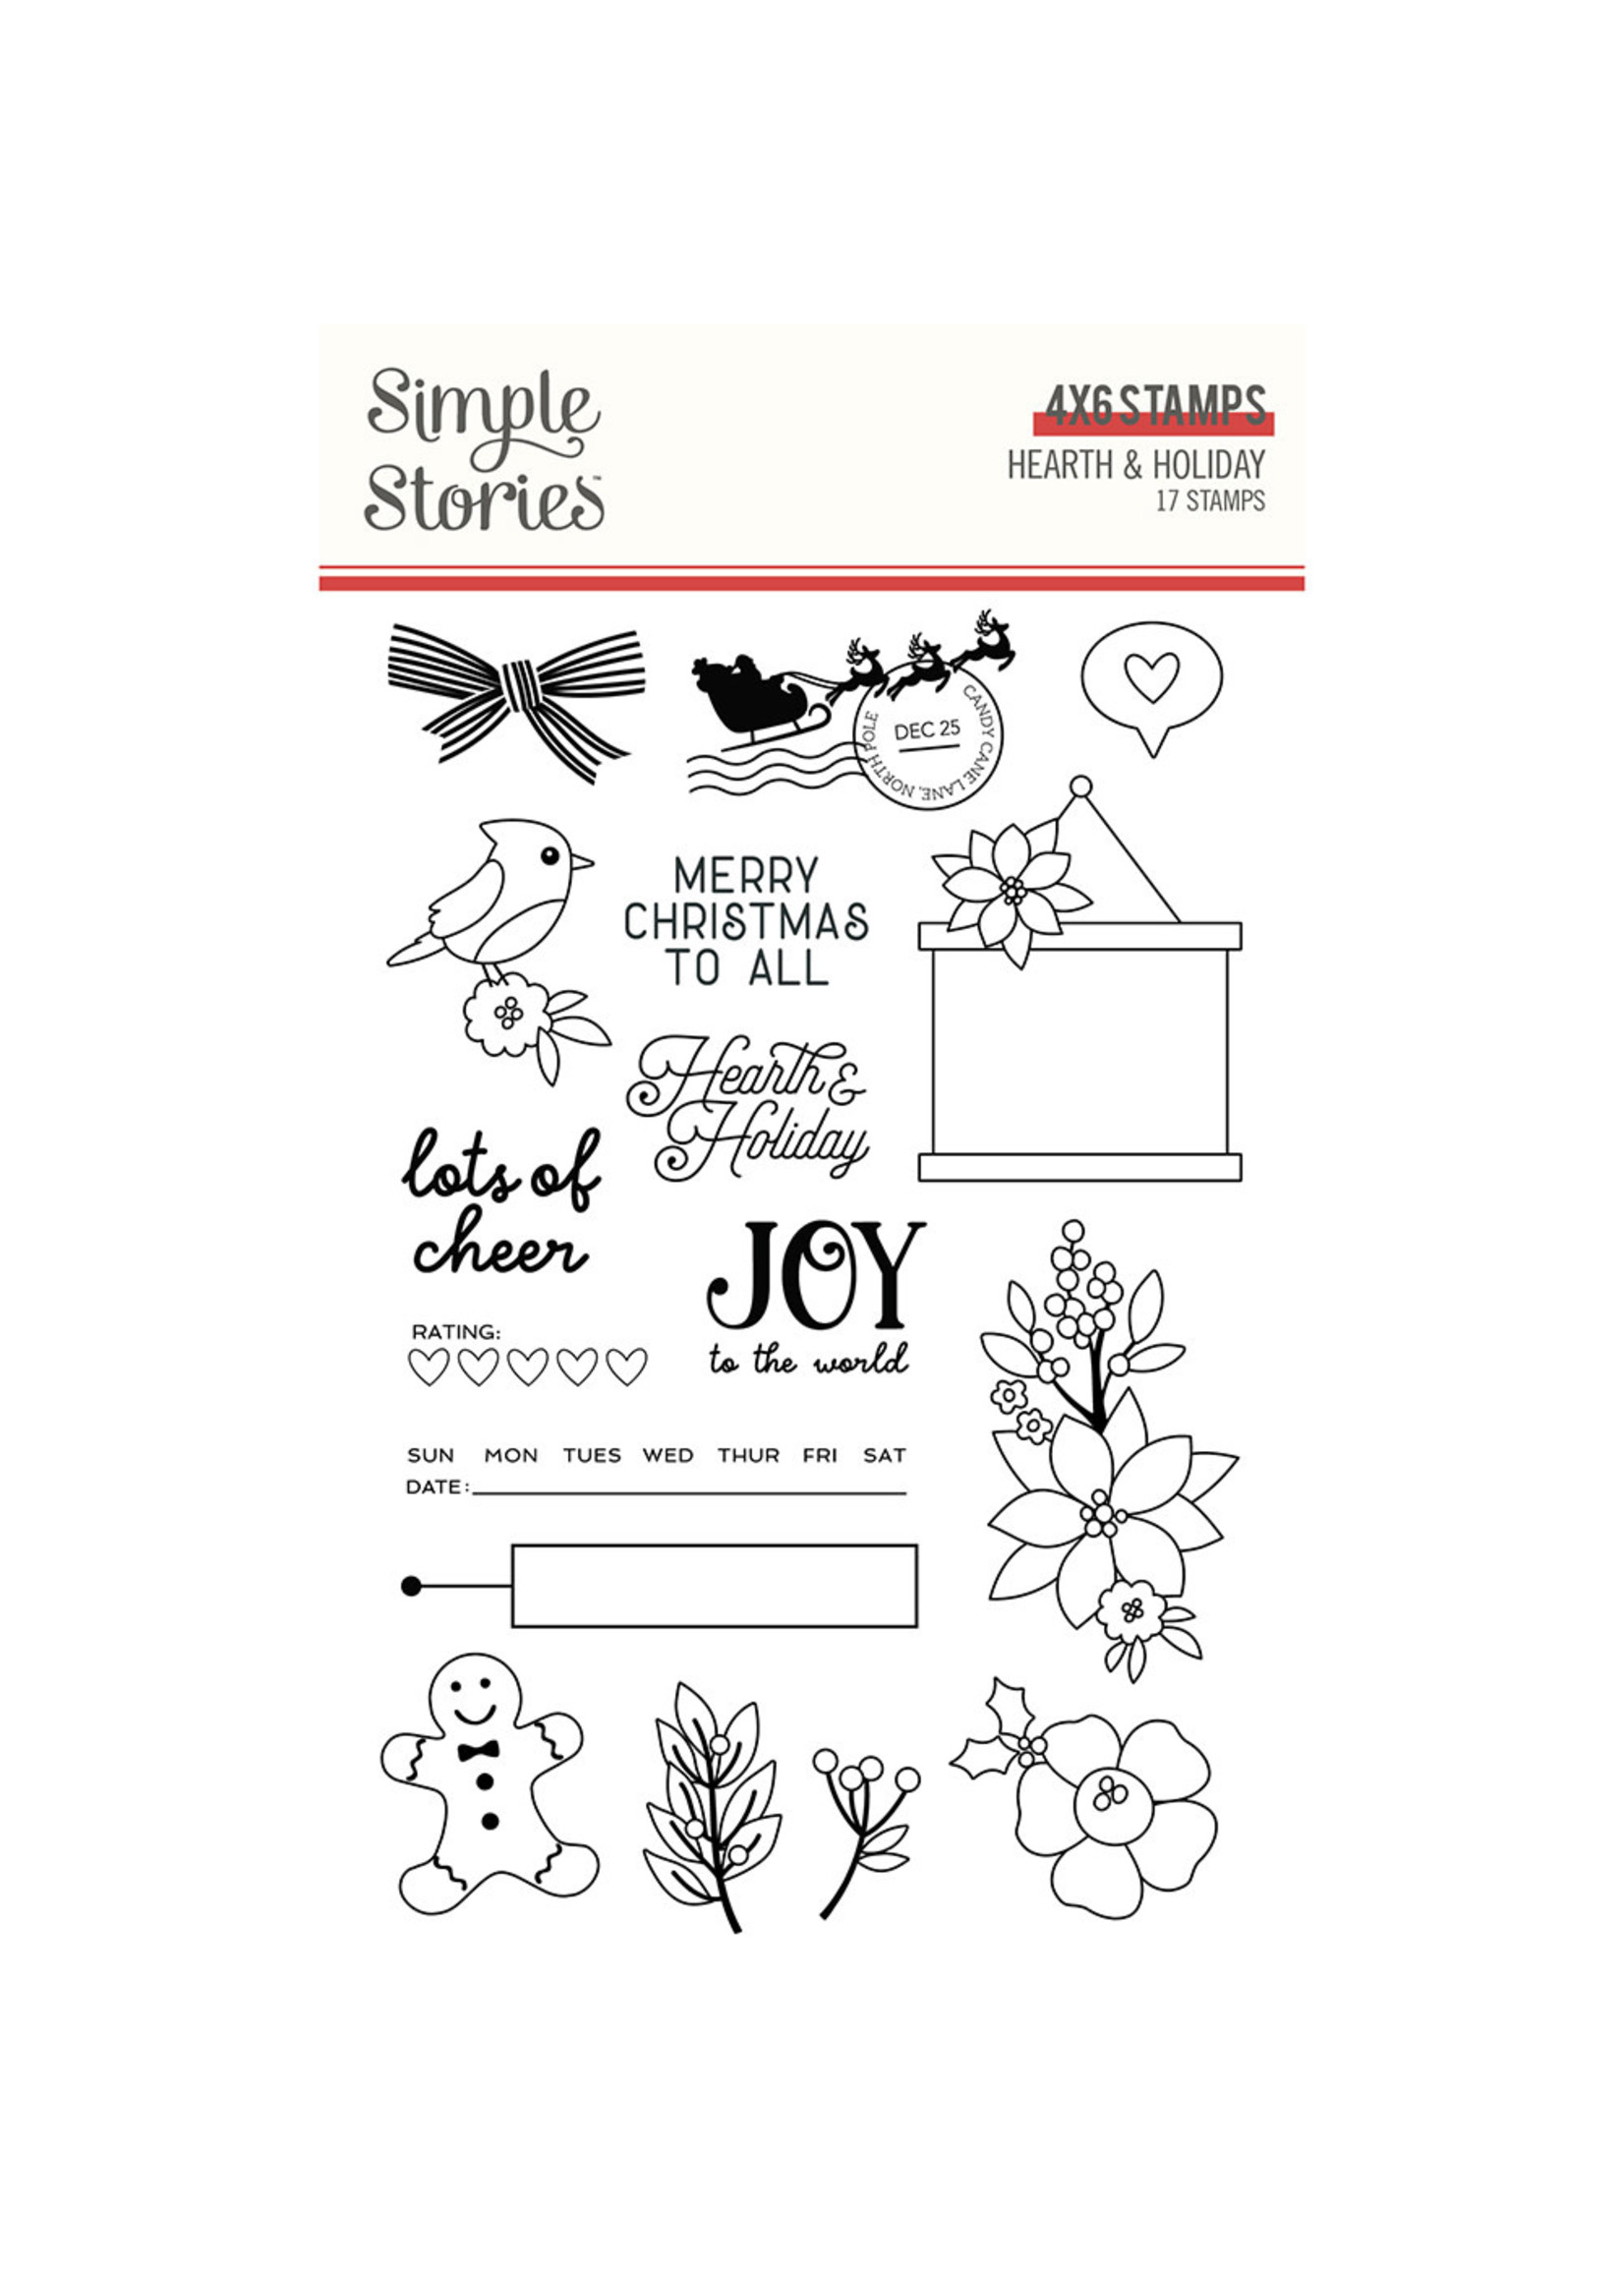 Simple Stories Hearth & Holiday - Stamps